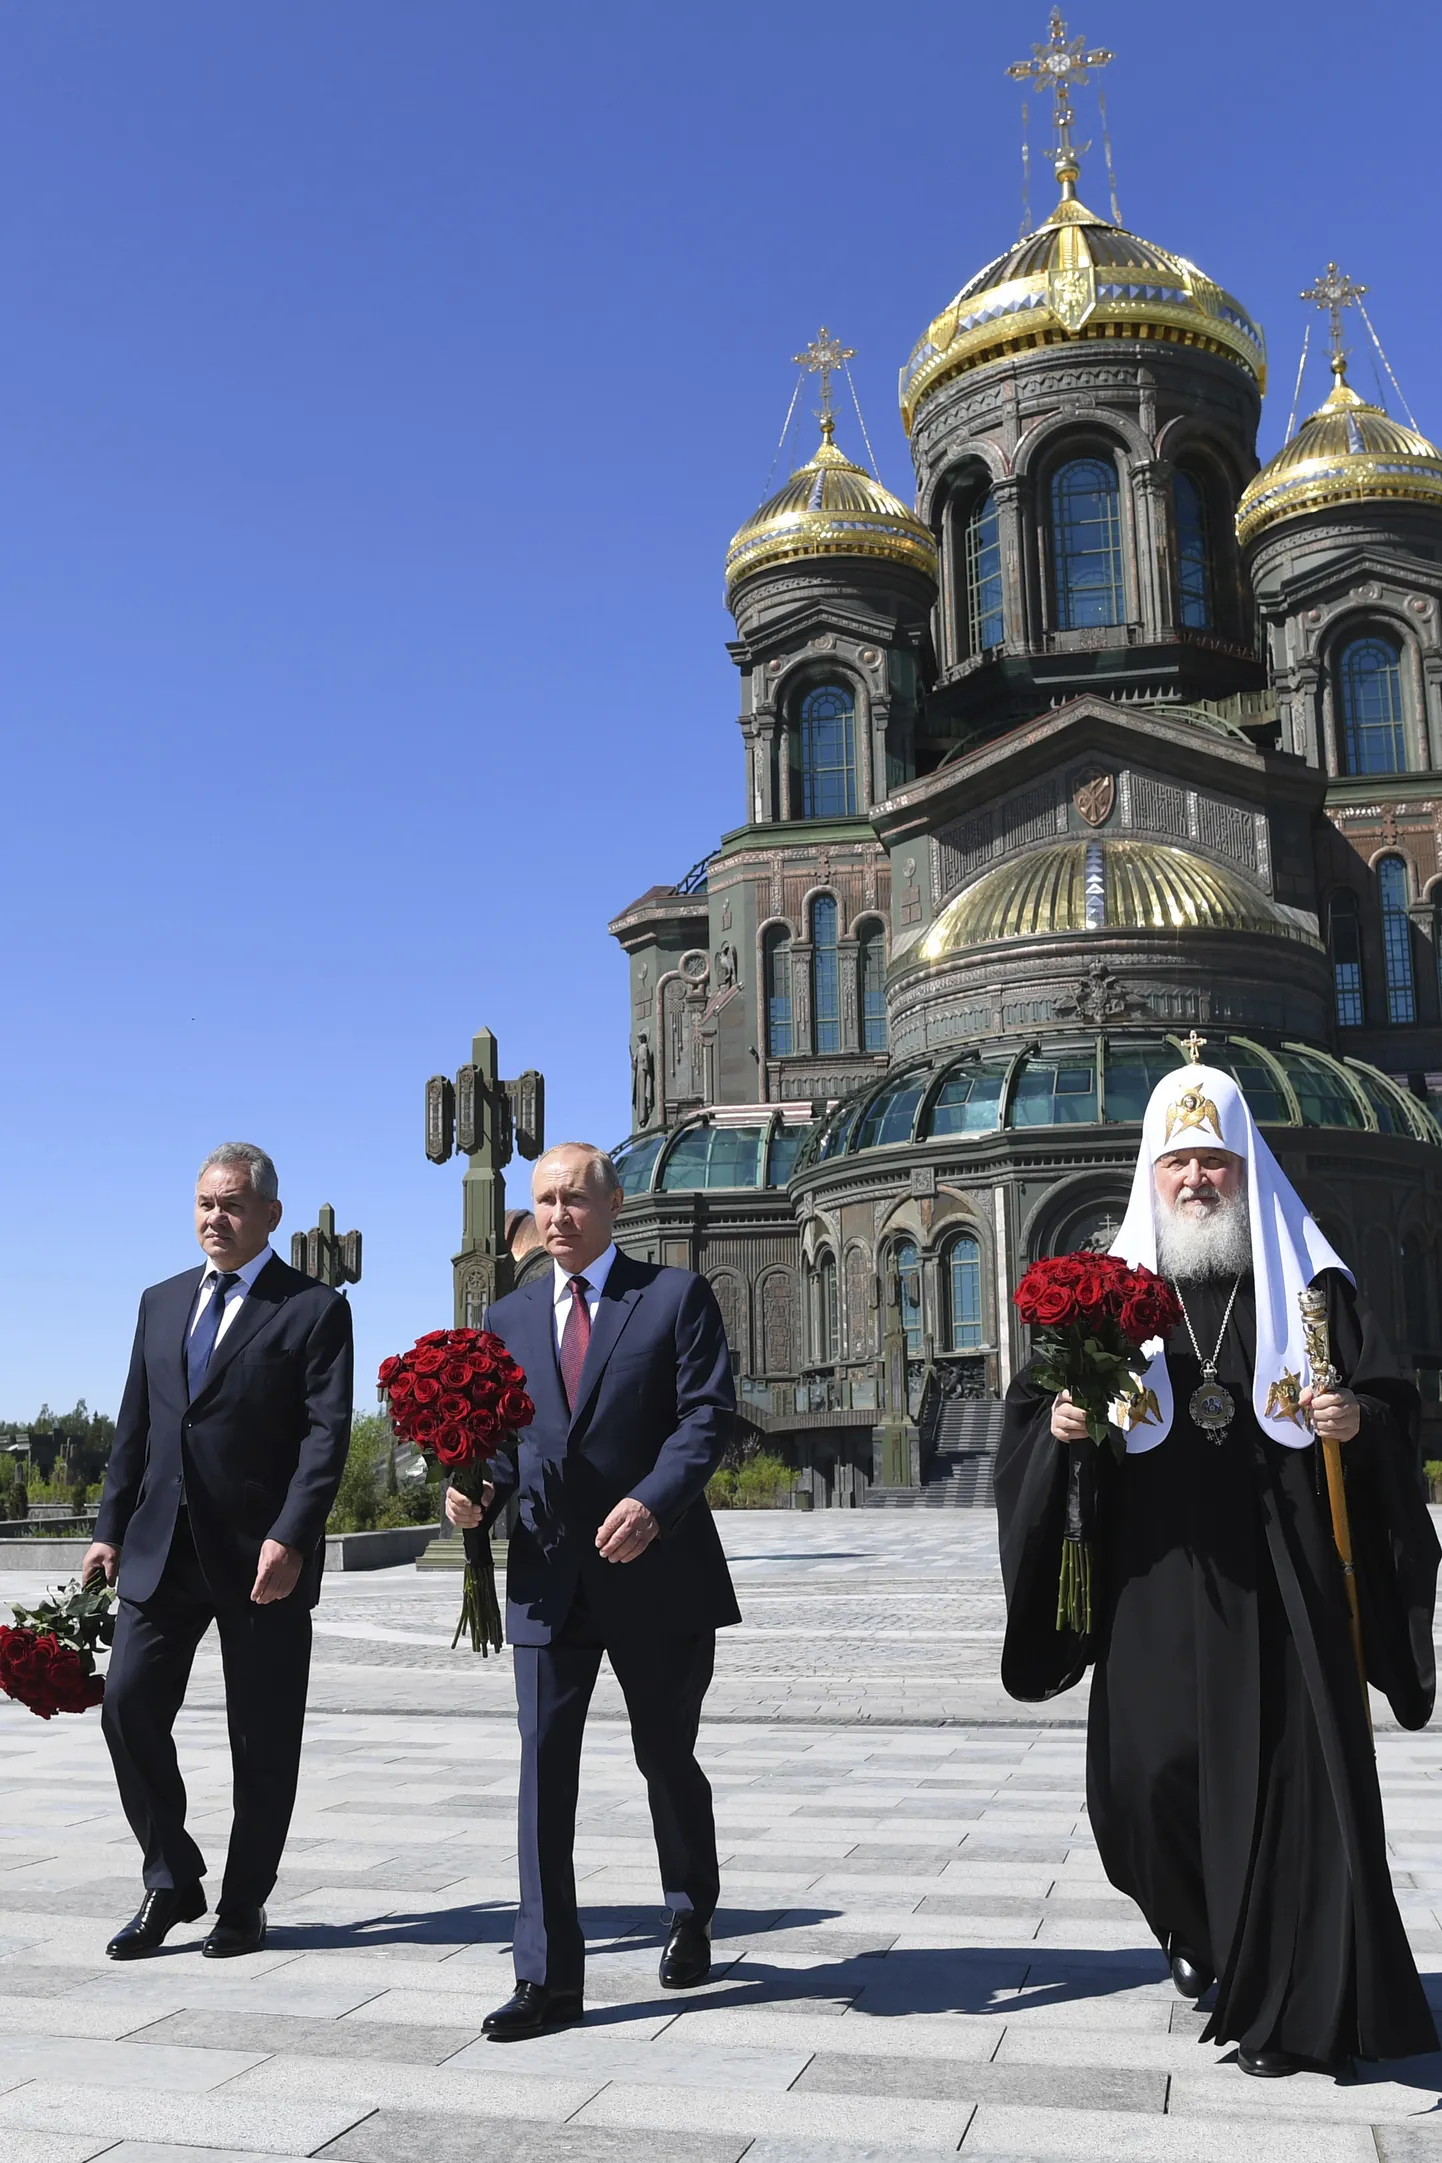 According to a report published by the Financial Times, Russia is planning to launch major hybrid attacks in Europe. In fact, Russia has been constantly mounting such attacks, but this has not brought with it any major problems. Pictured: the ruler of Russia, Vladimir Putin, with Patriarch Kirill of Moscow and Defense Minister Sergey Shoigu celebrating the victory in World War II.